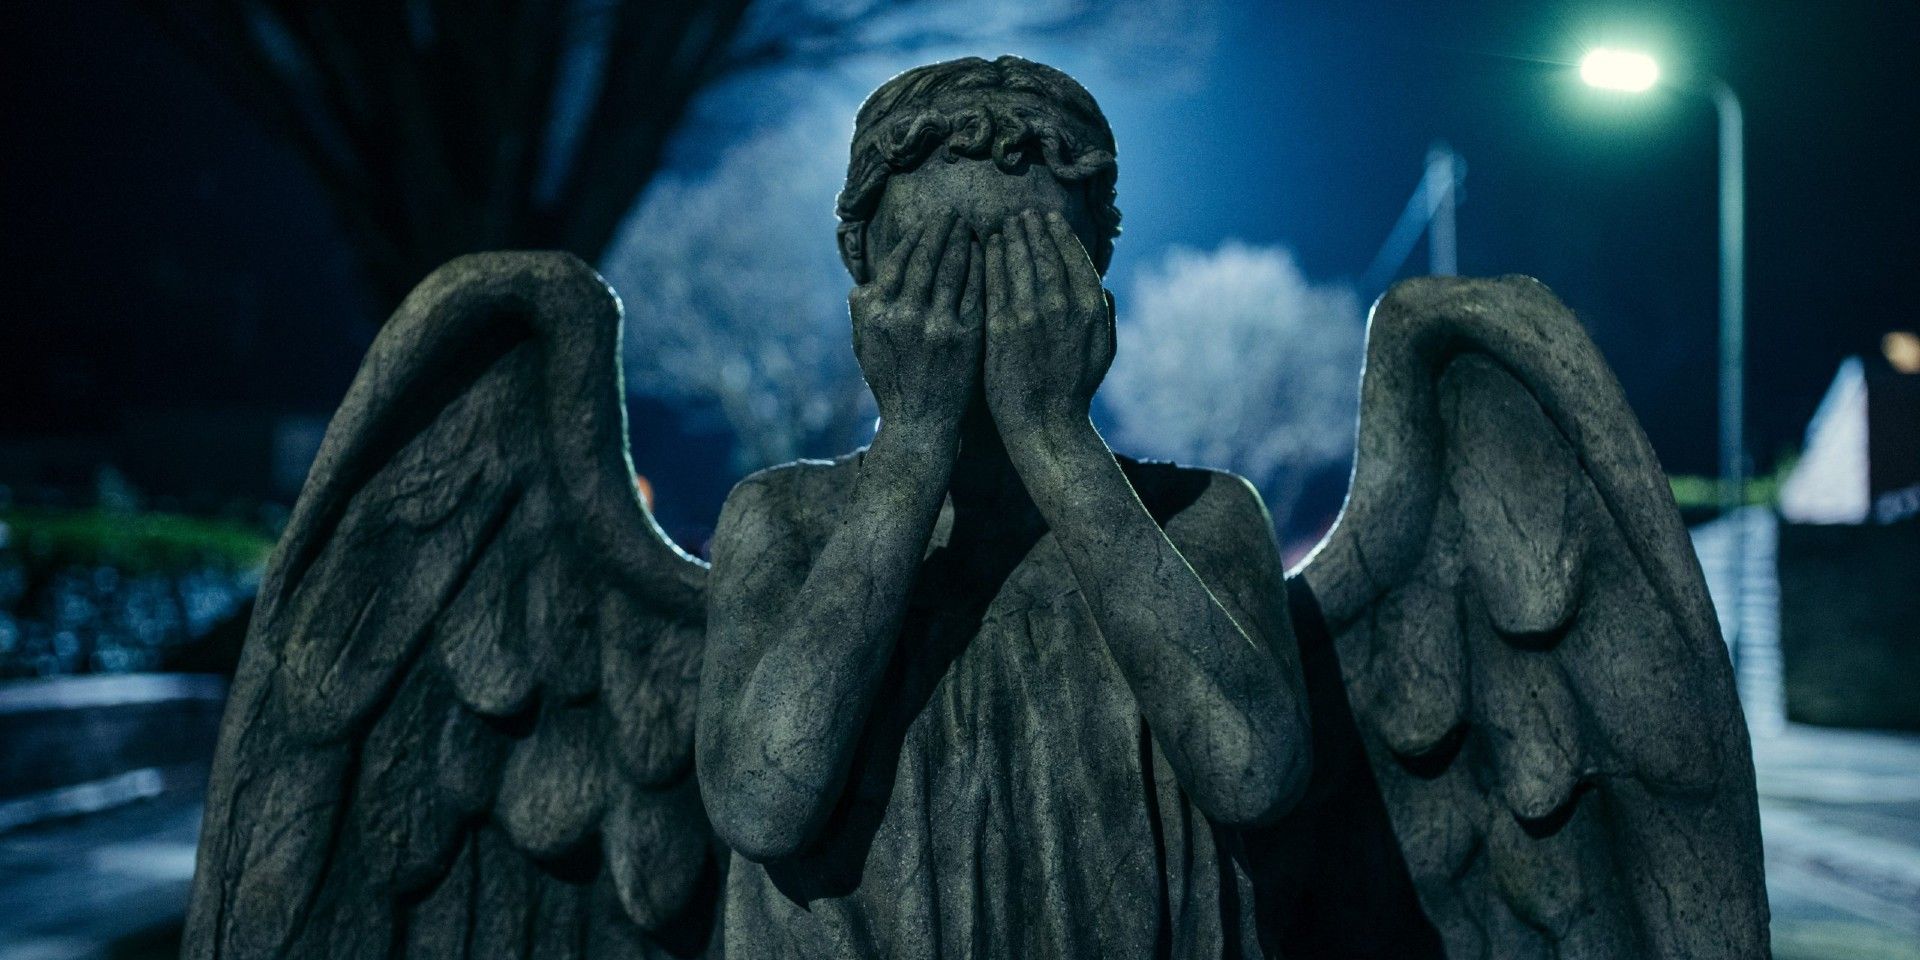 Weeping Angel with its hands over its face in the dark